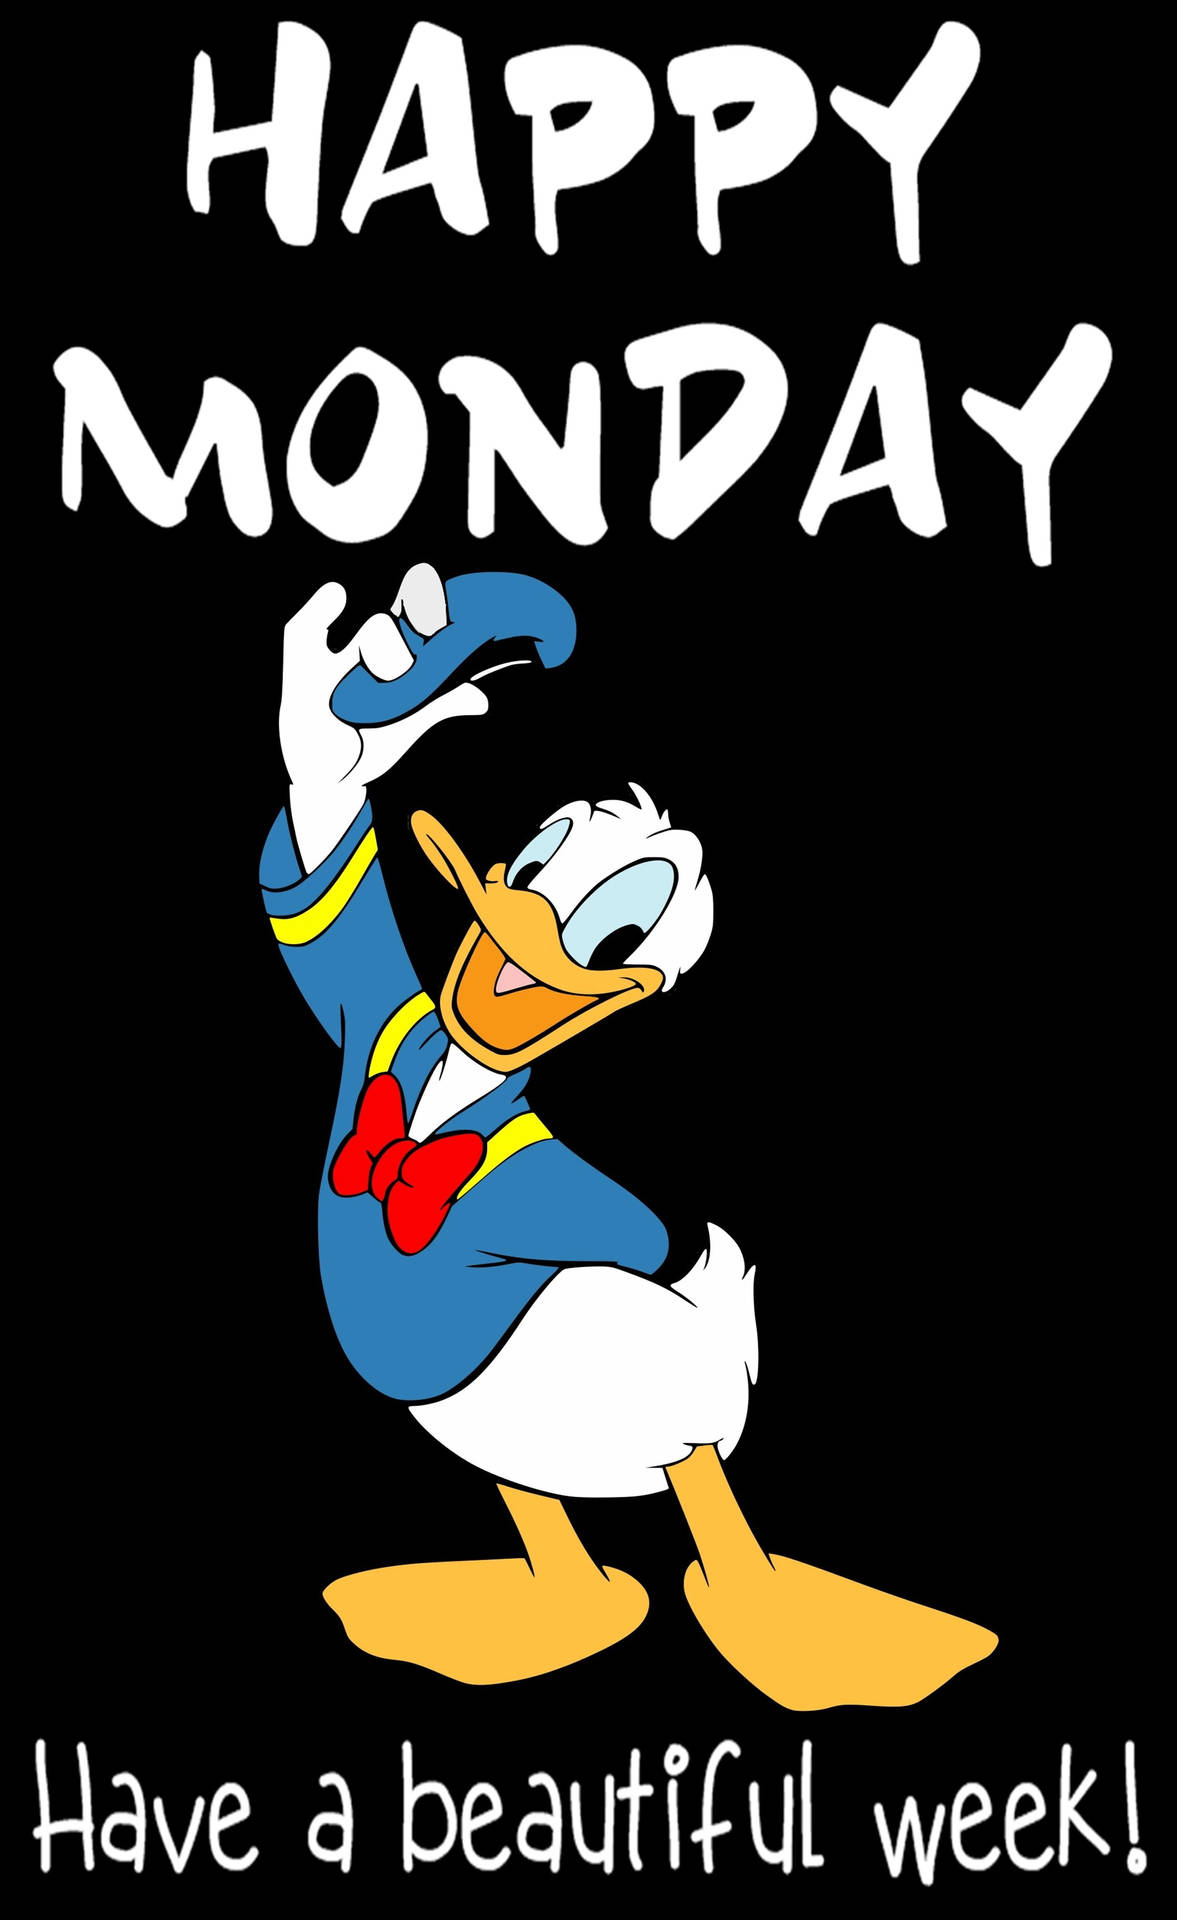 Rev Up Your Week With Donald Duck's Happy Monday Enthusiasm. Background